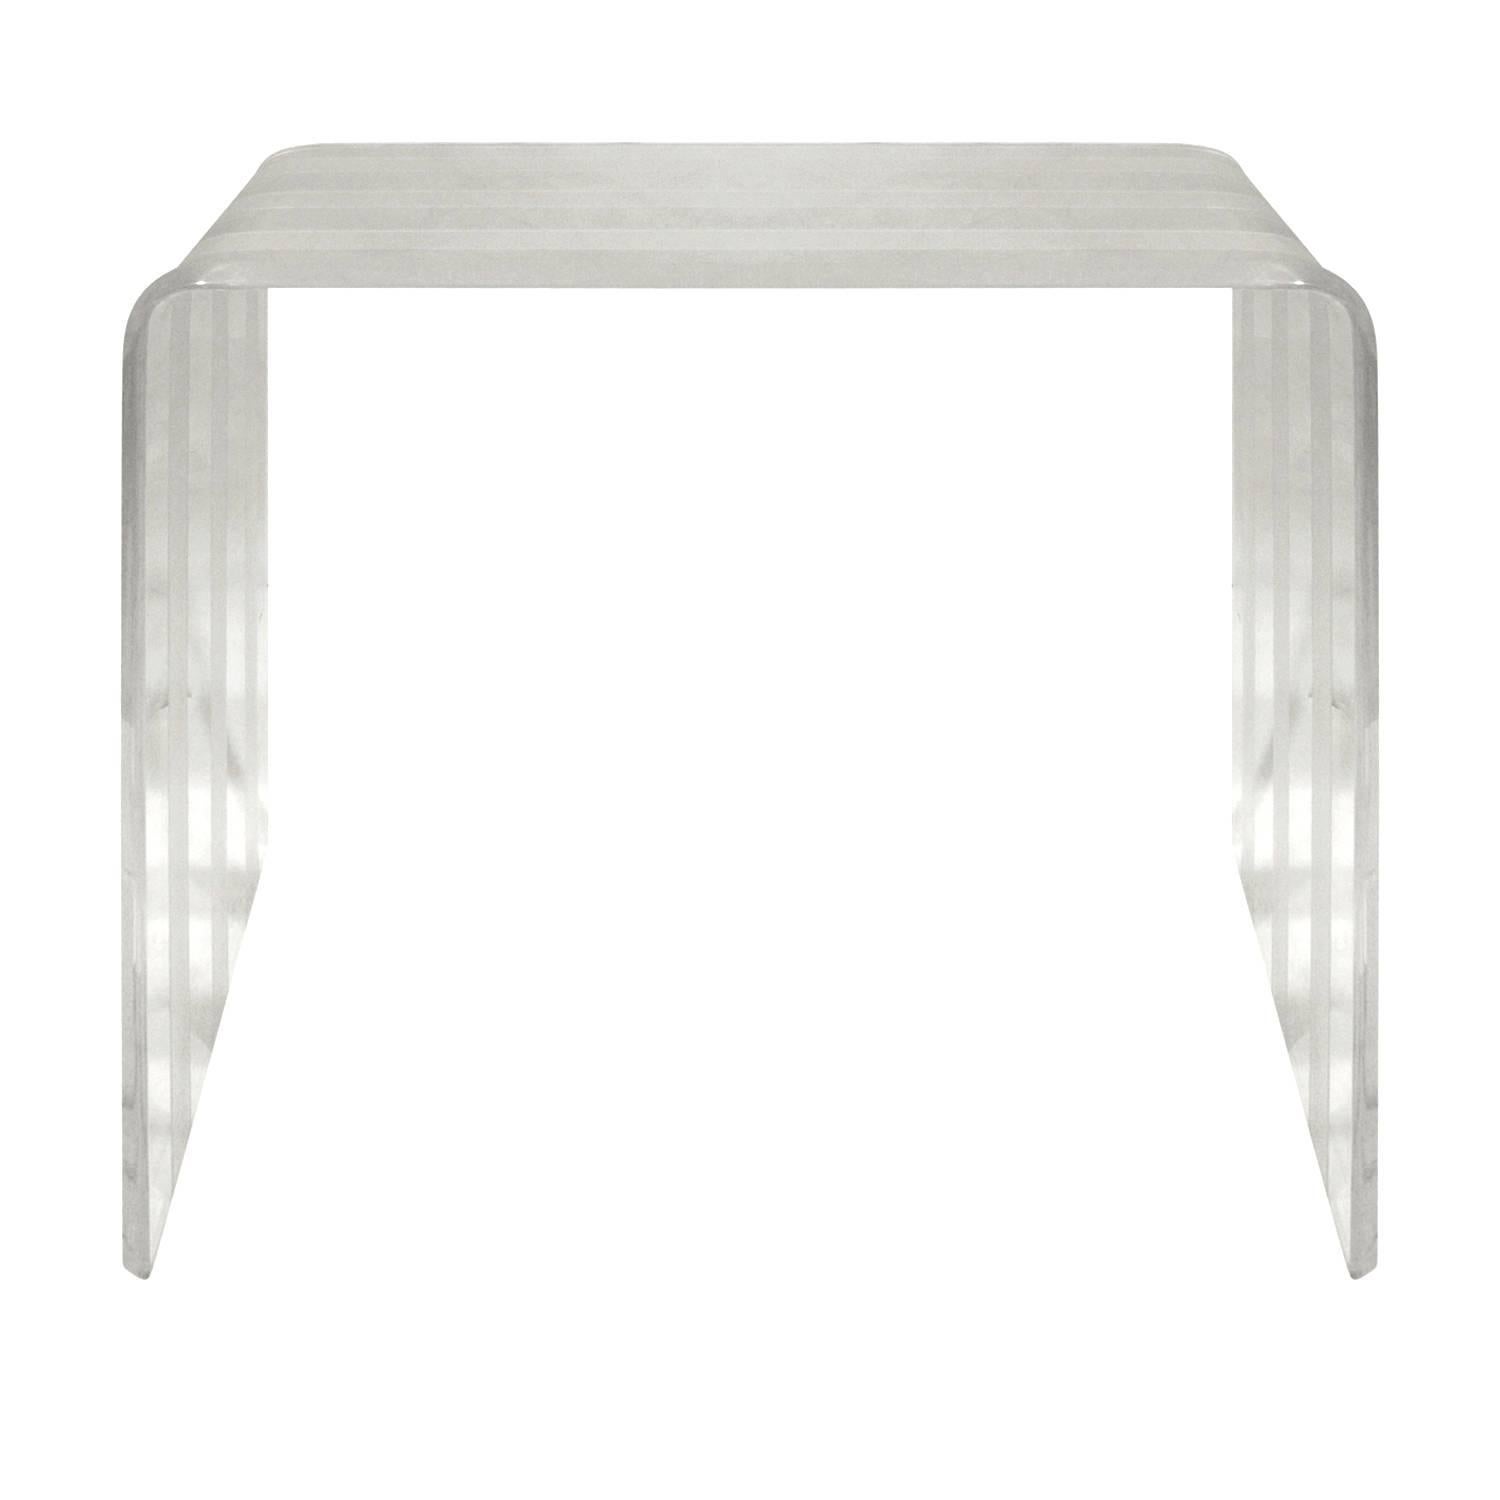 American Set of Three Chic Lucite Nesting Tables, 1970s